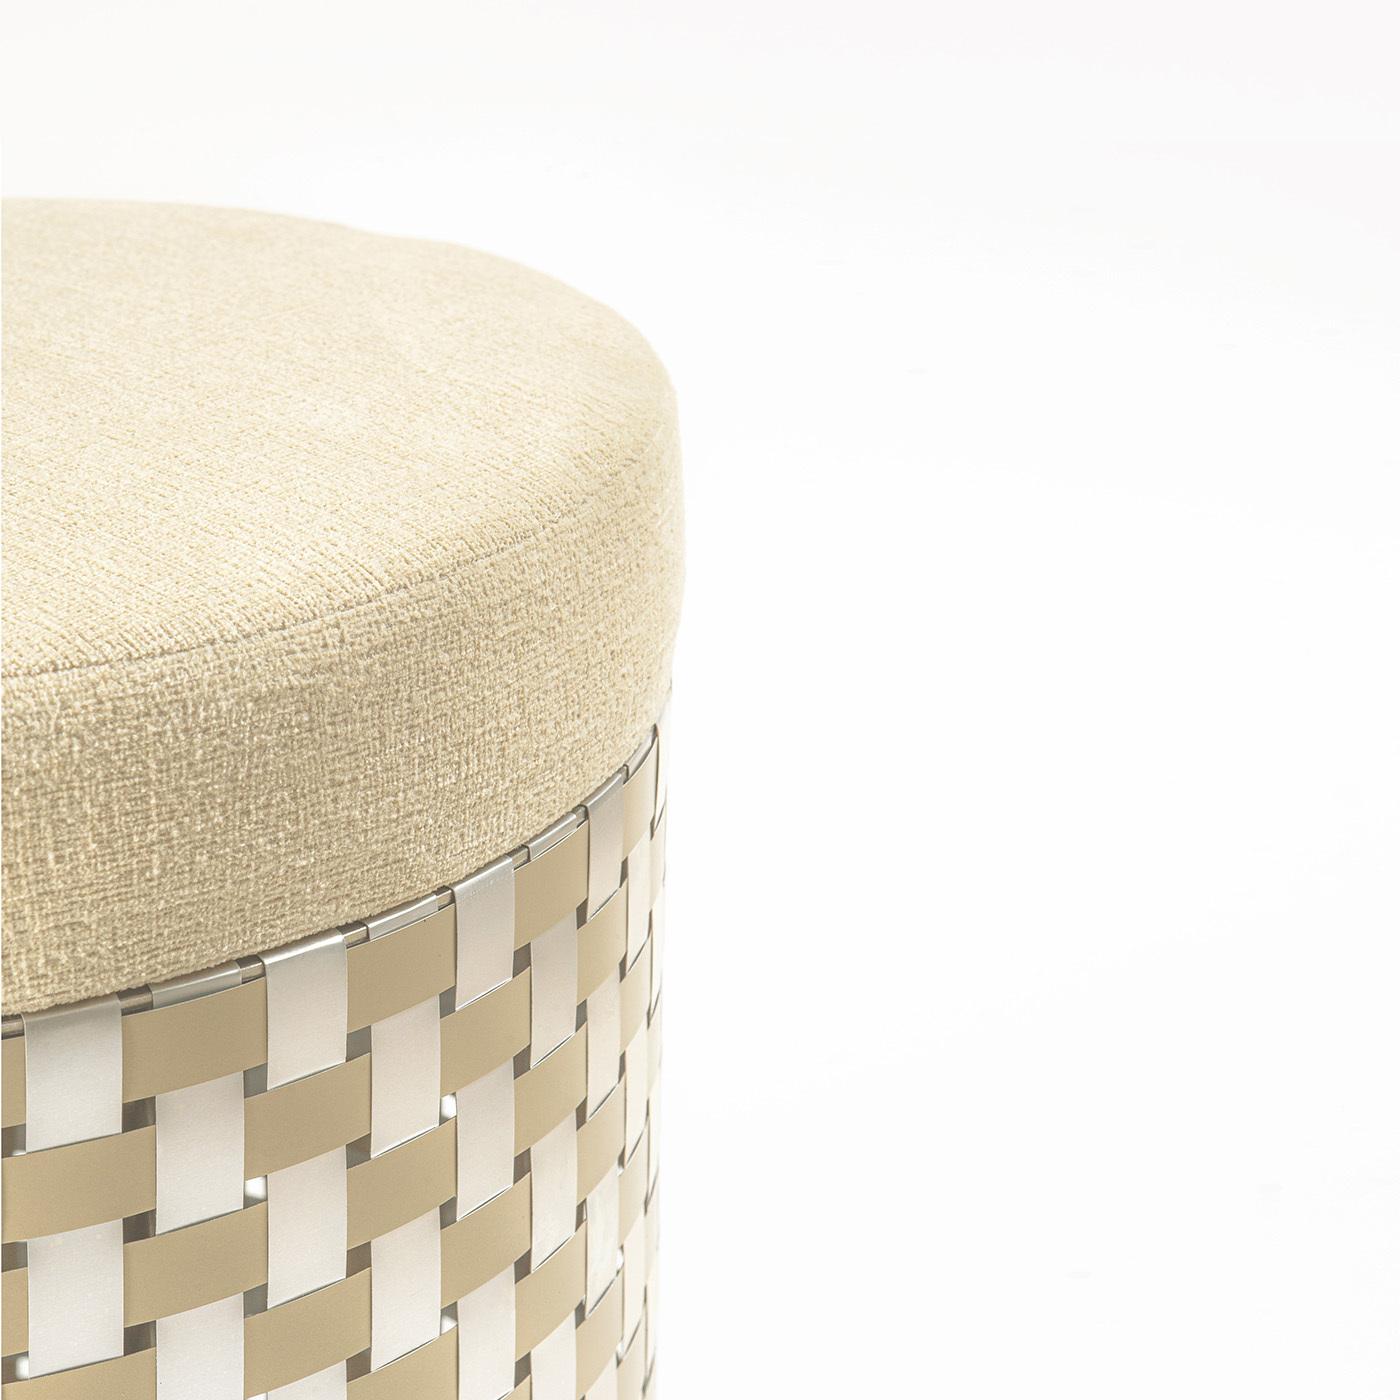 A stunning accent piece for a modern interior, this pouf showcases a singular design inspired by the Optical Art movement of the 1960s. Magnificently crafted of Splot, an interwoven mesh of gold and natural-finished aluminum slats, its cylindrical